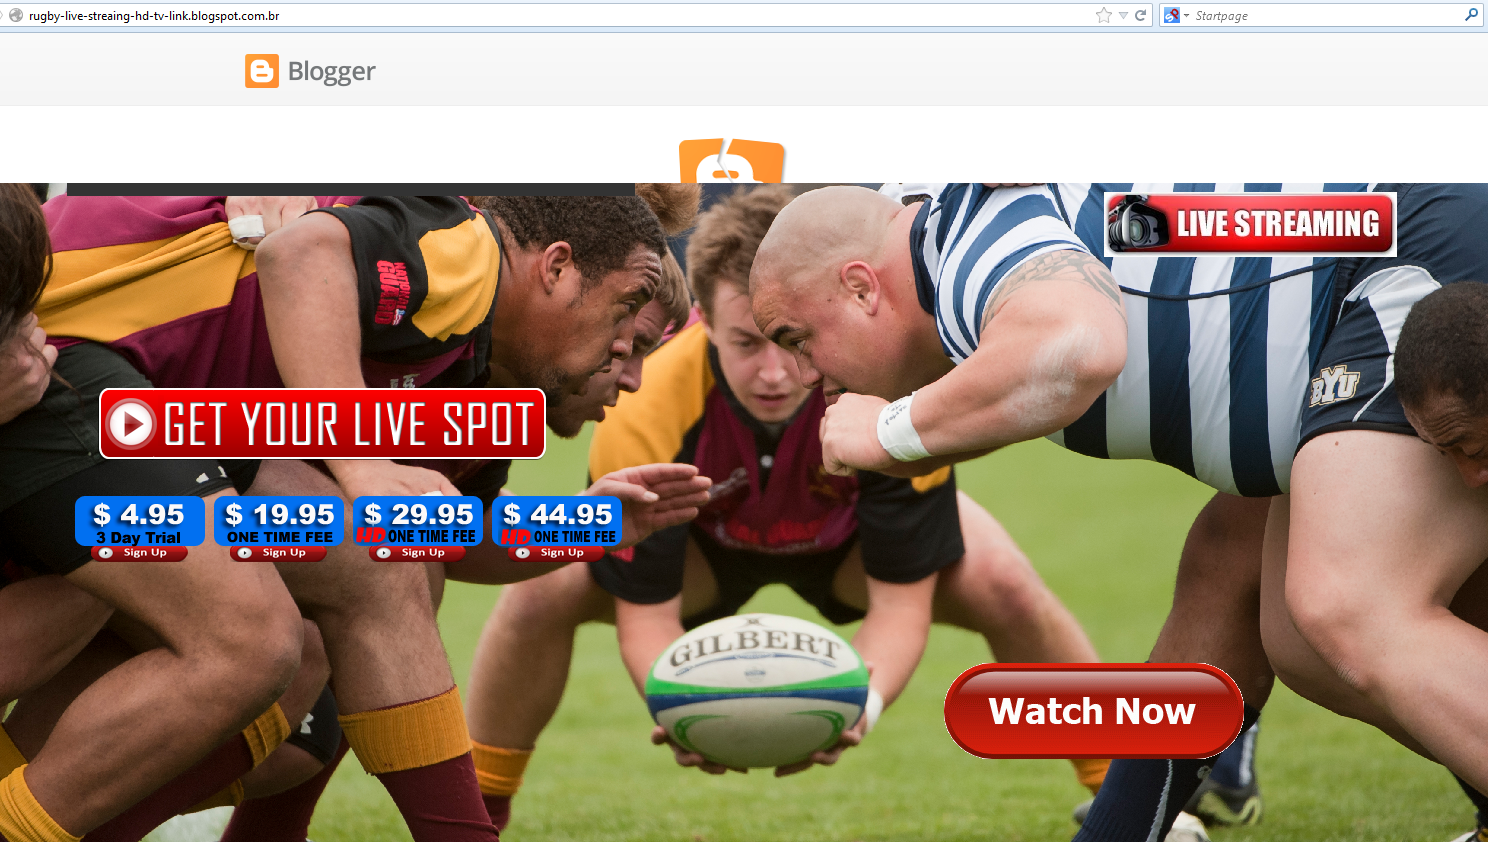 Rugby streaming page hosted on Blogger